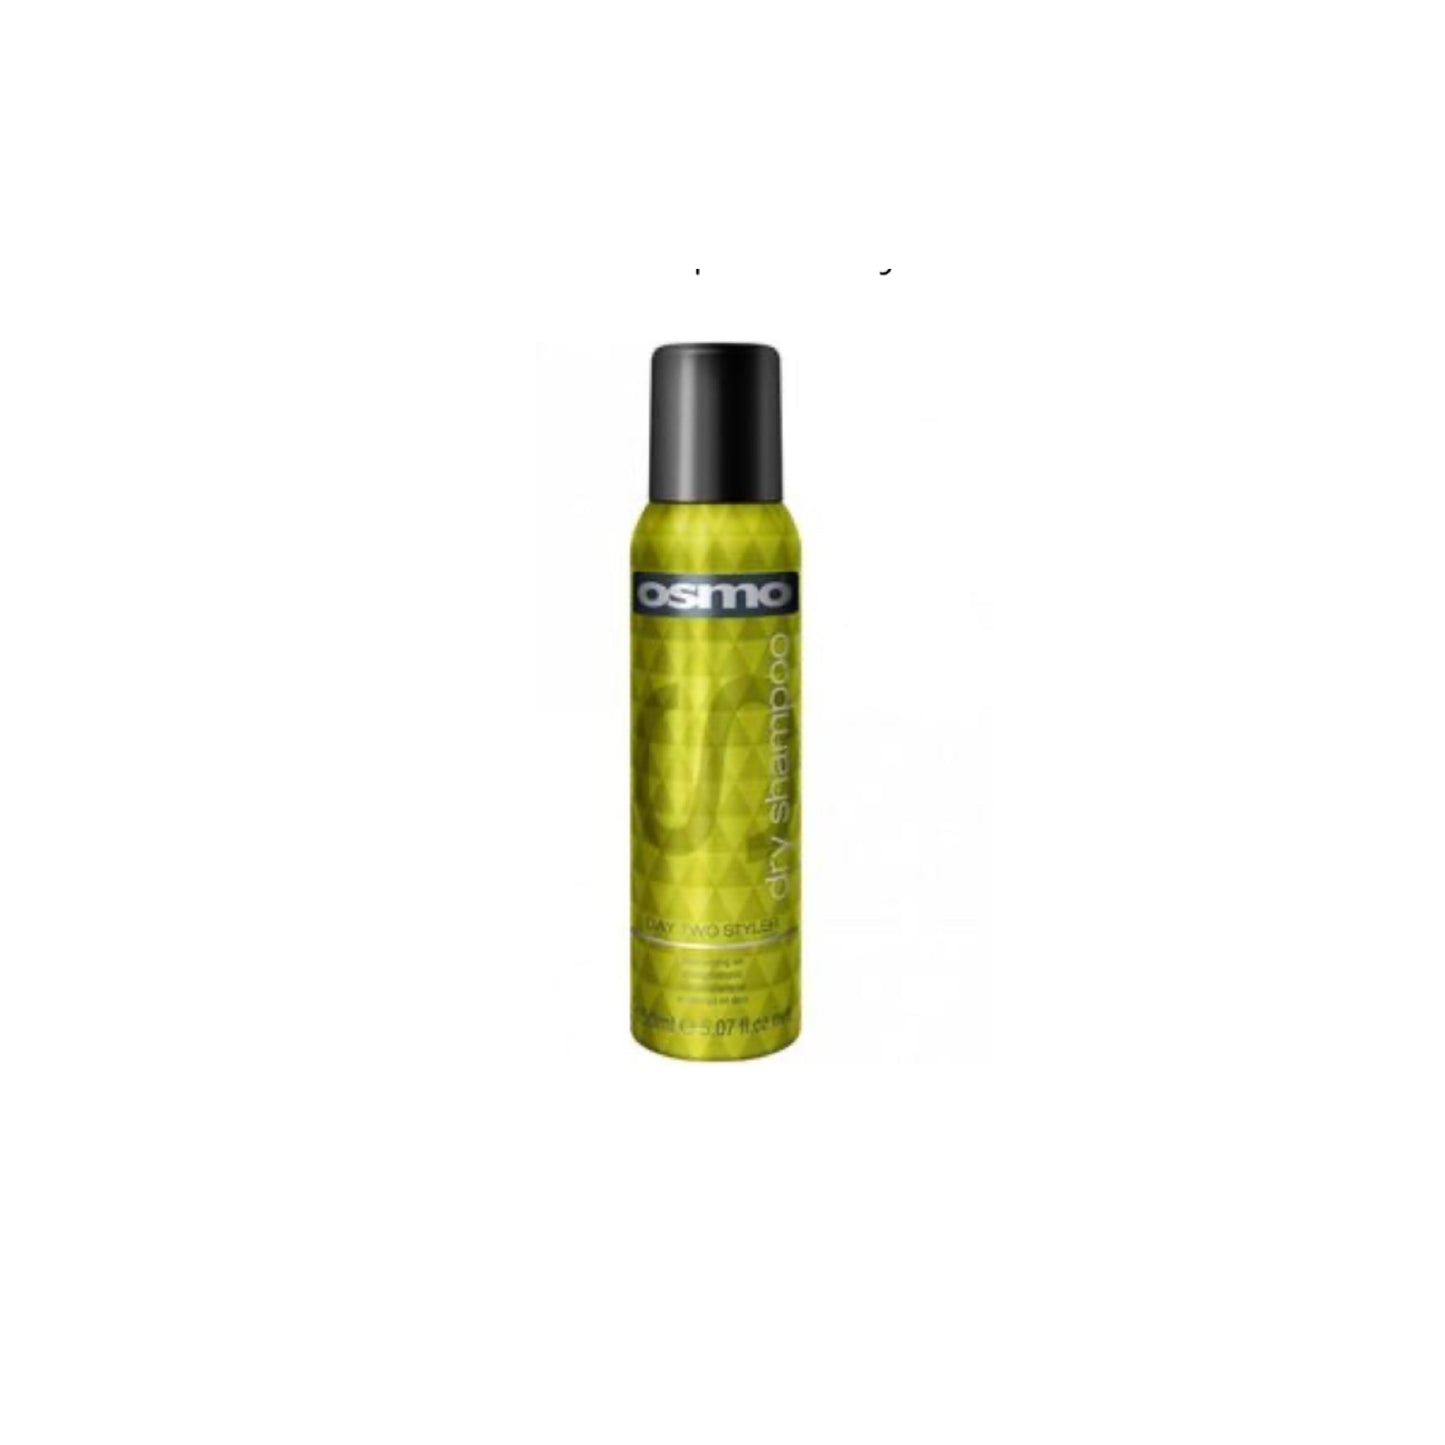 Osmo Dry Shampoo Day Two Styler (150ml